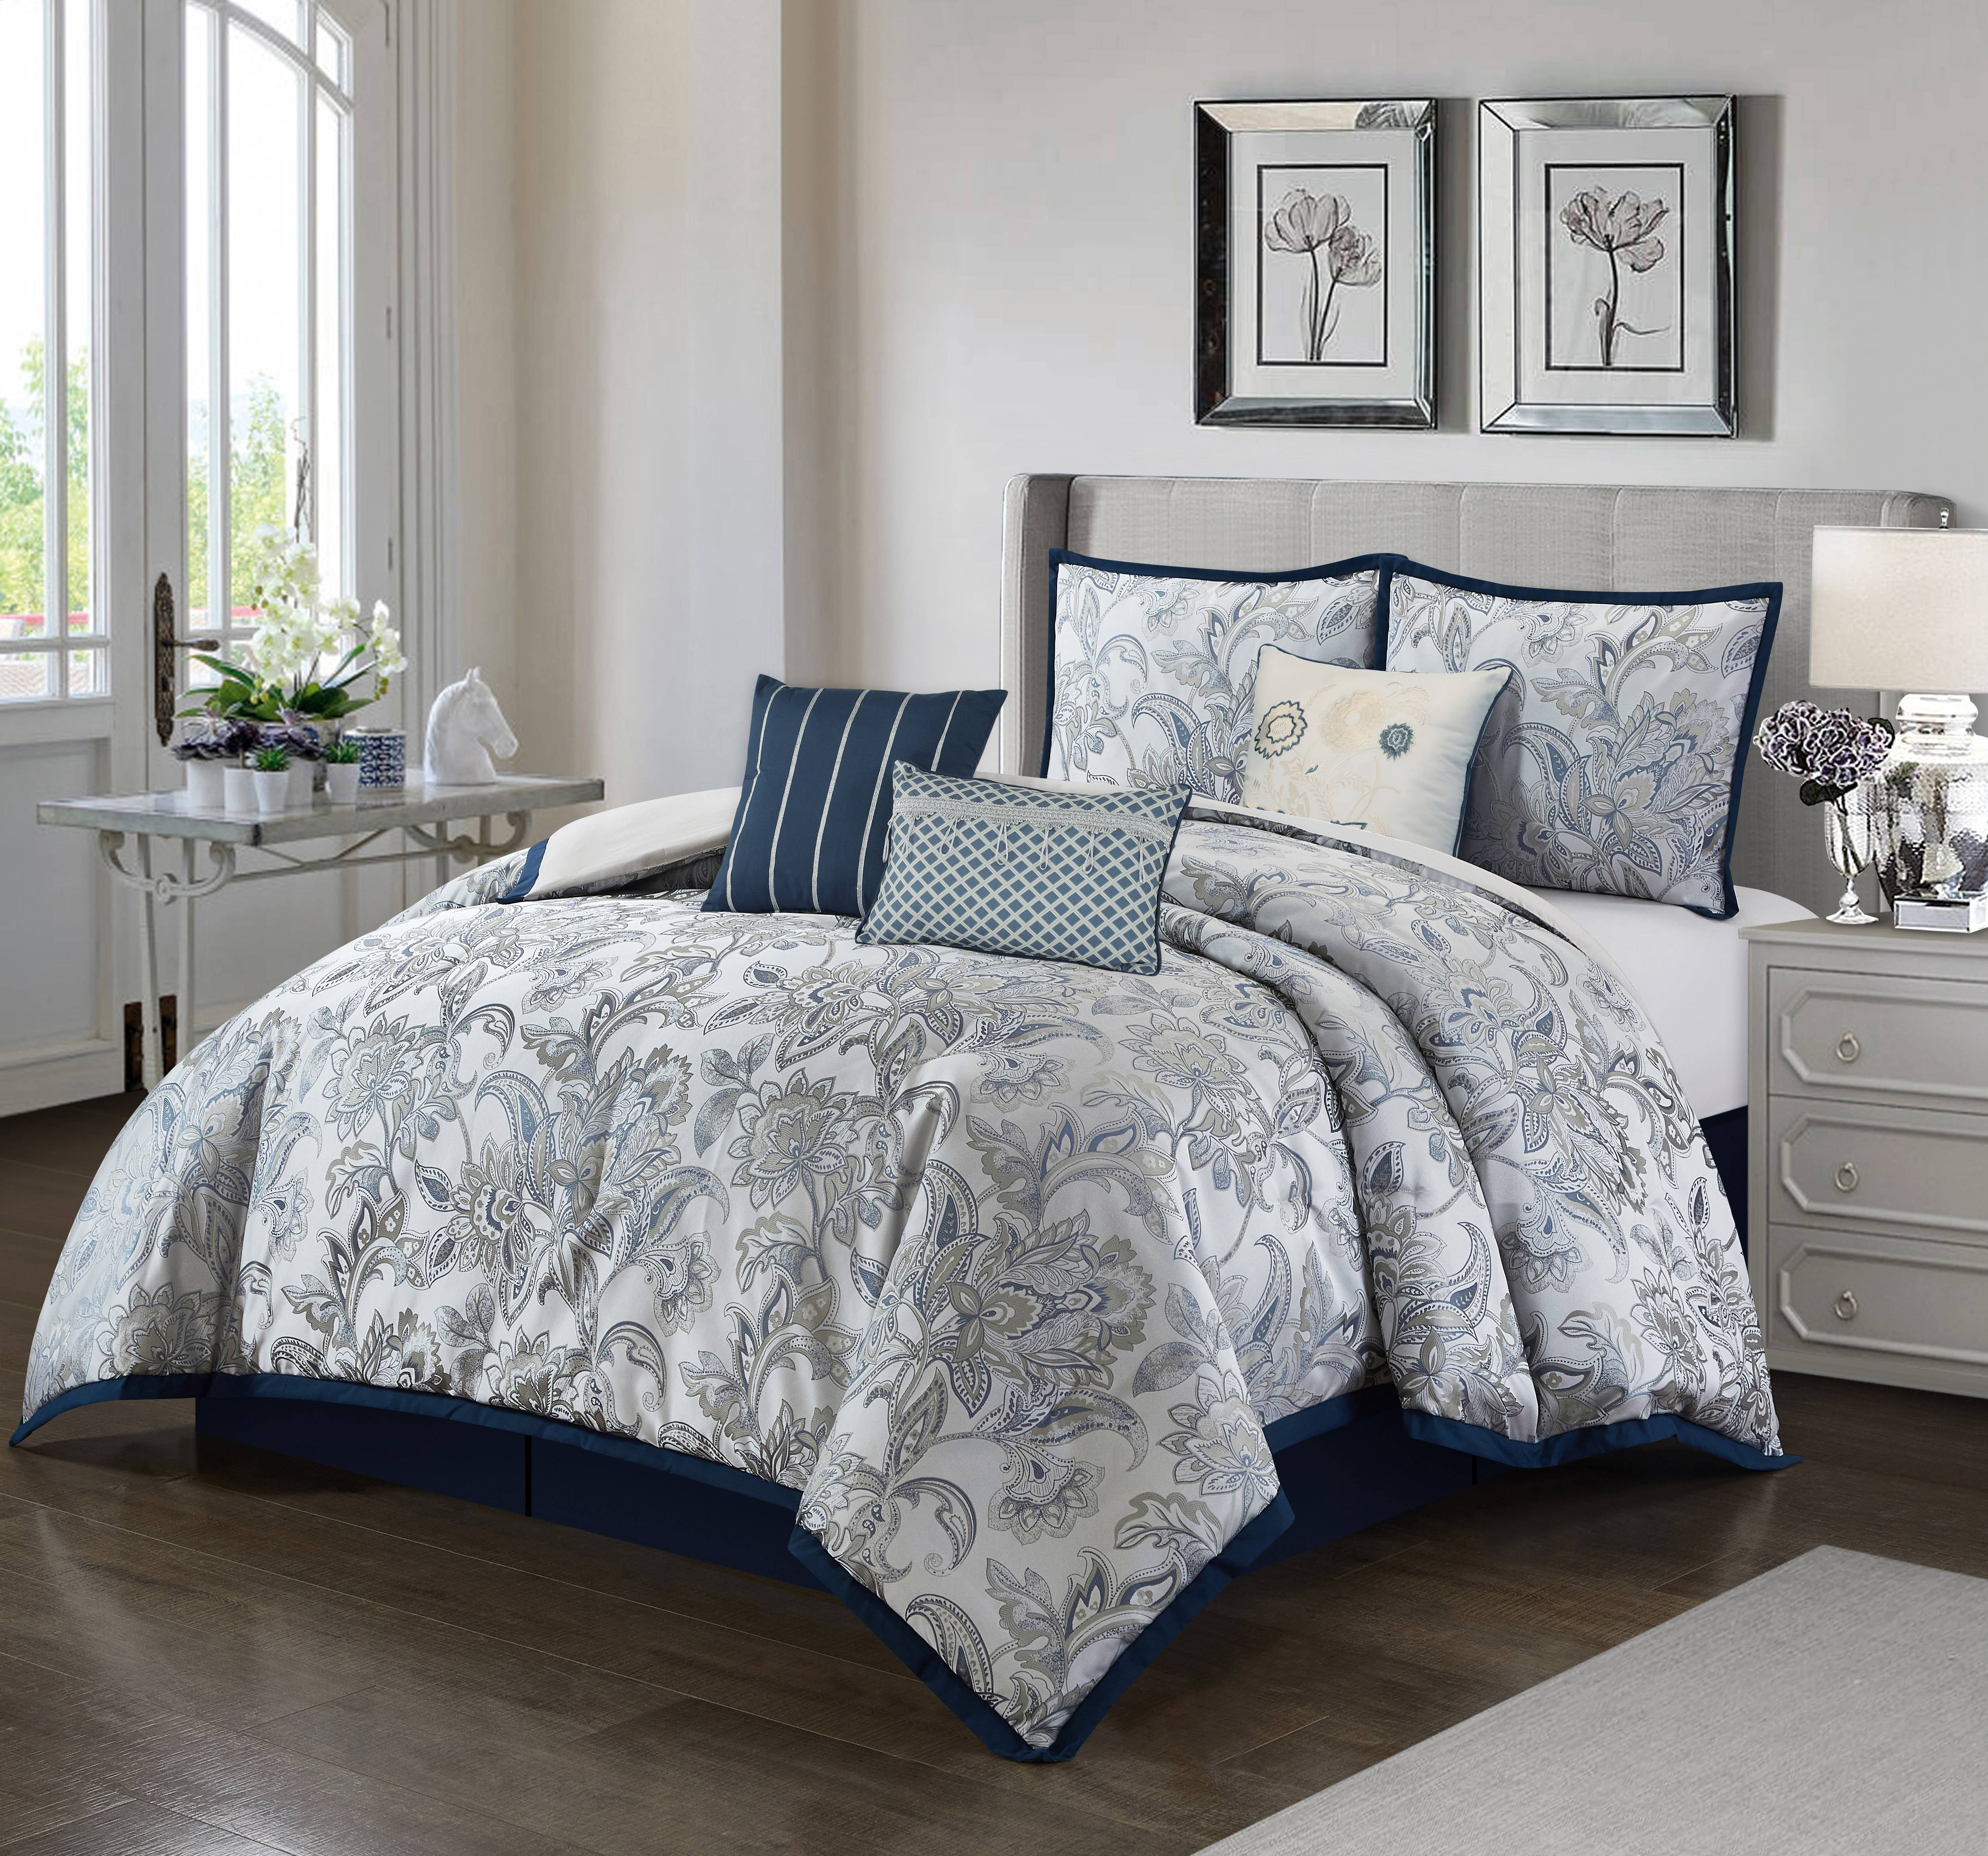 100% Cotton Bedroom Comforters 3 Pieces Bedding Sets Taupe Pieced Chevron INK+IVY Alpine Full/Queen Size Bed Comforter Set Ivory Navy